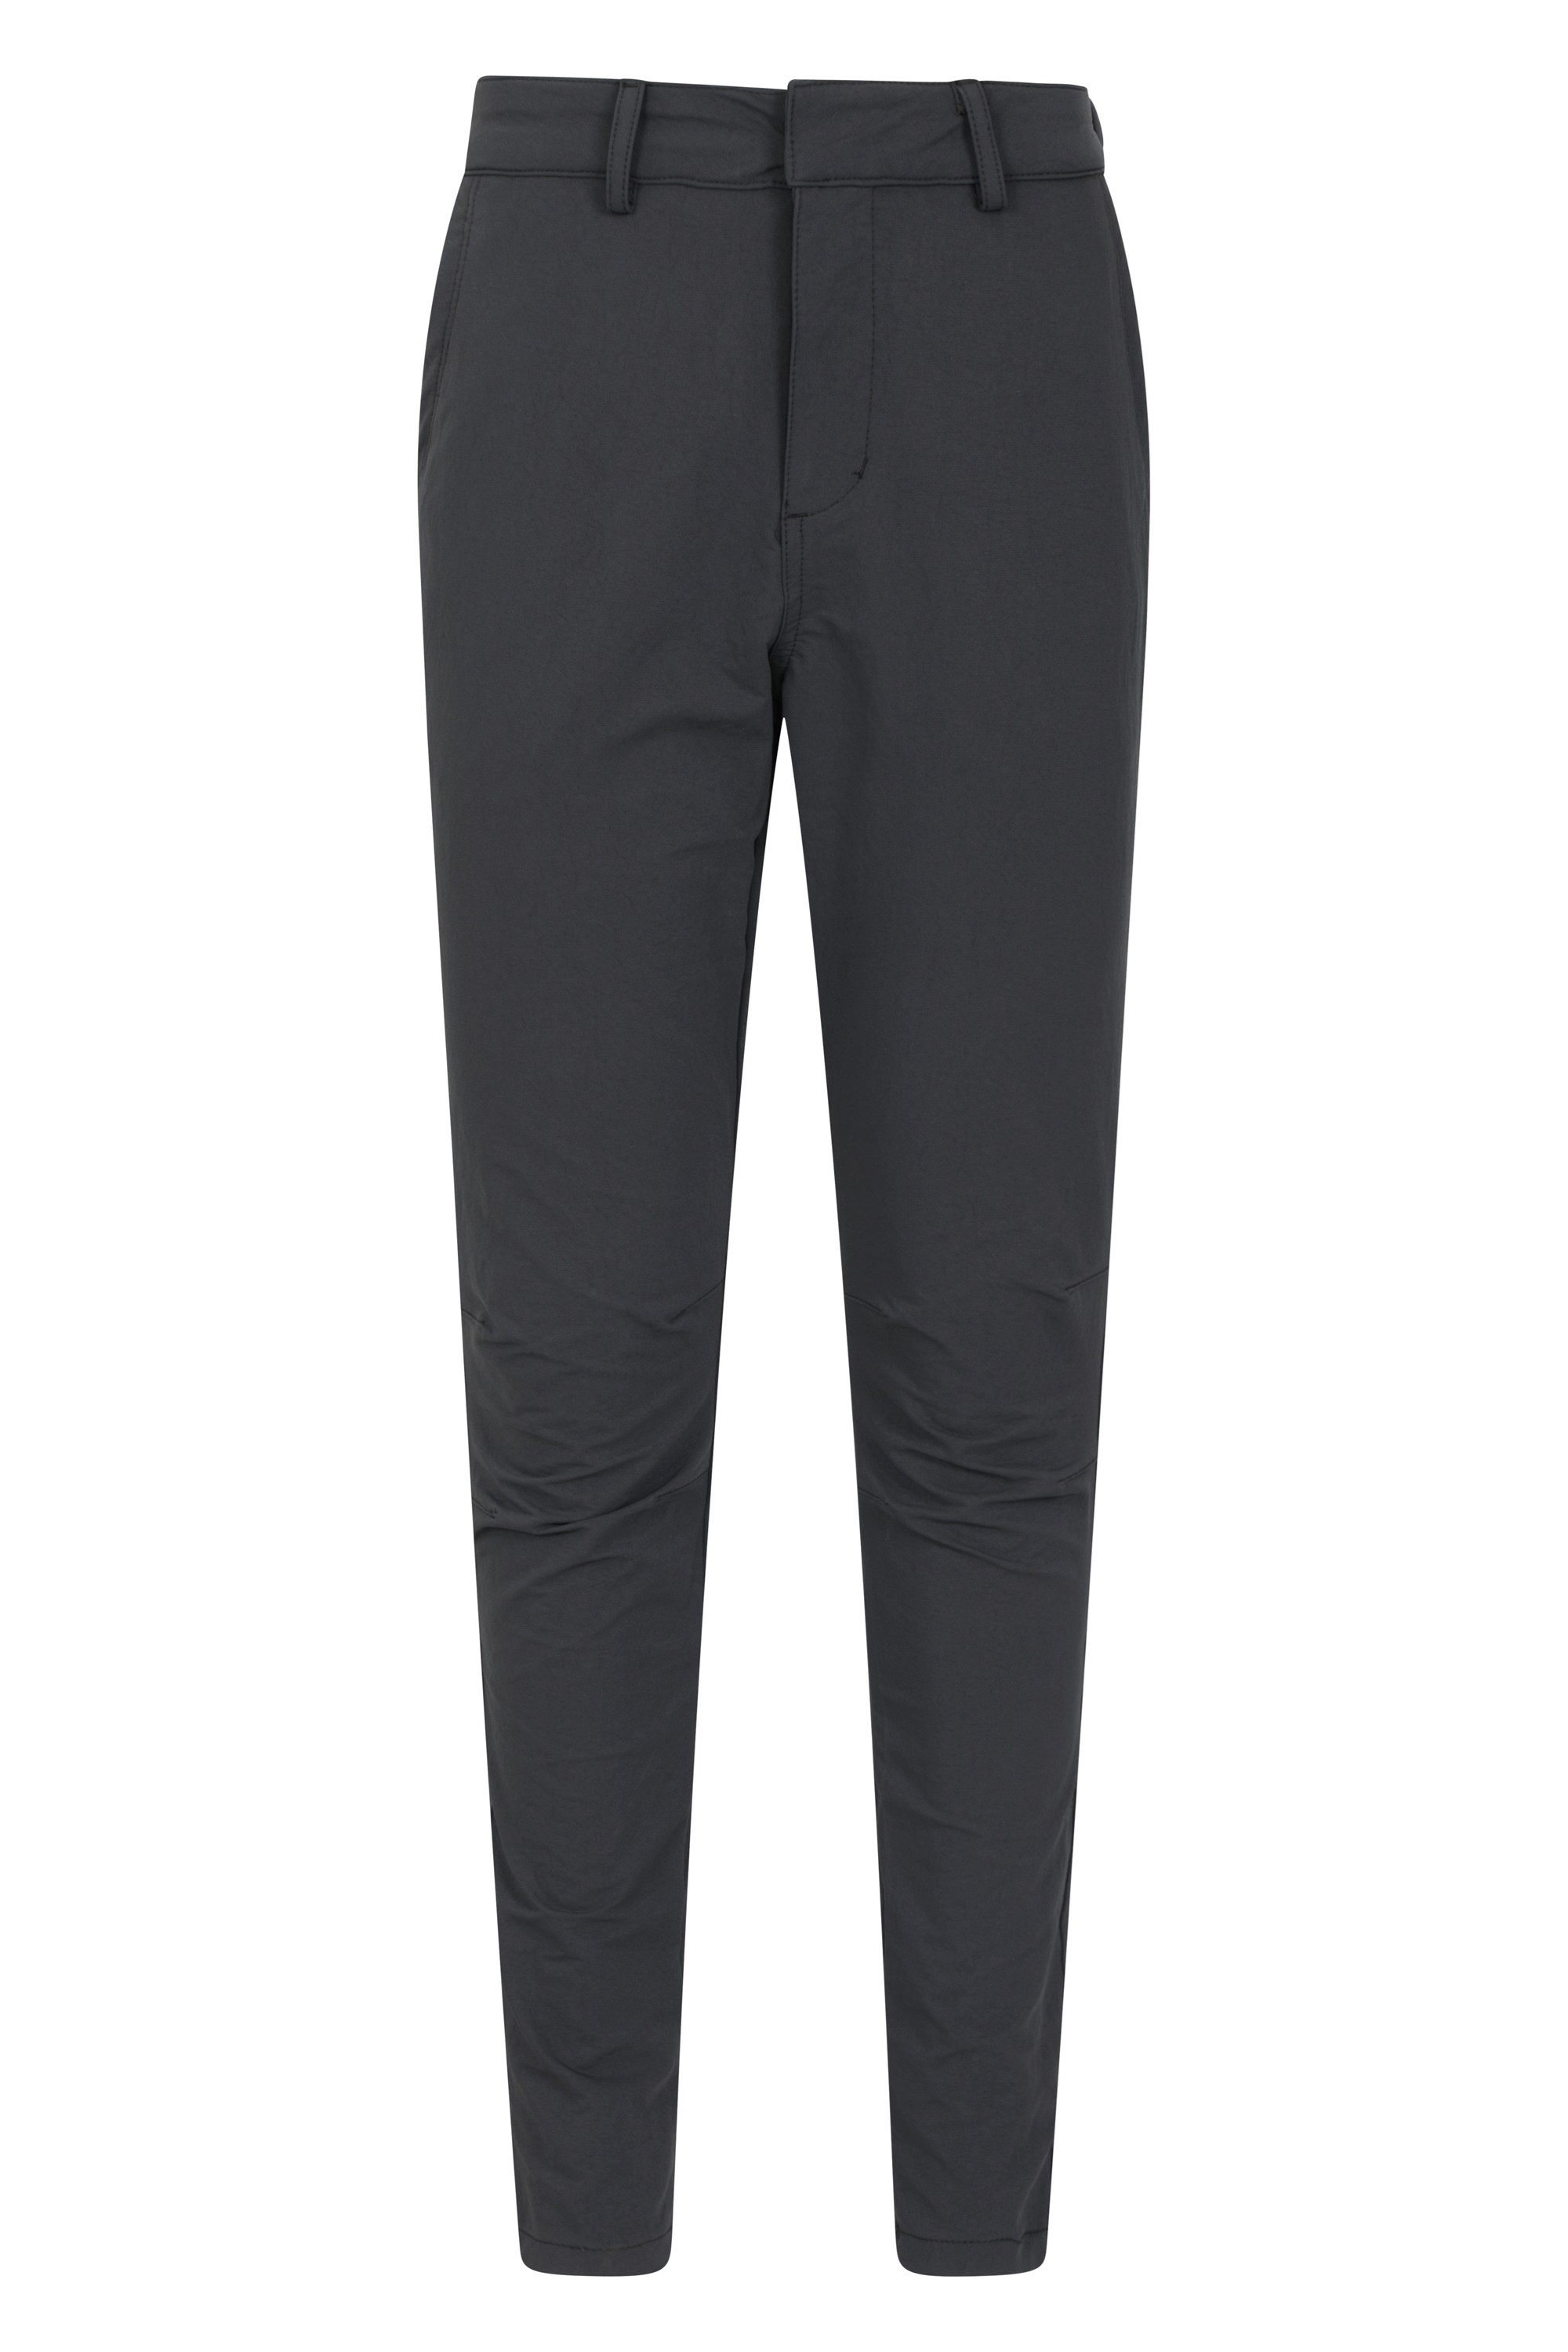 AJF,ladies stretch walking trousers|OFF 79%|thinkcomputers.co.in